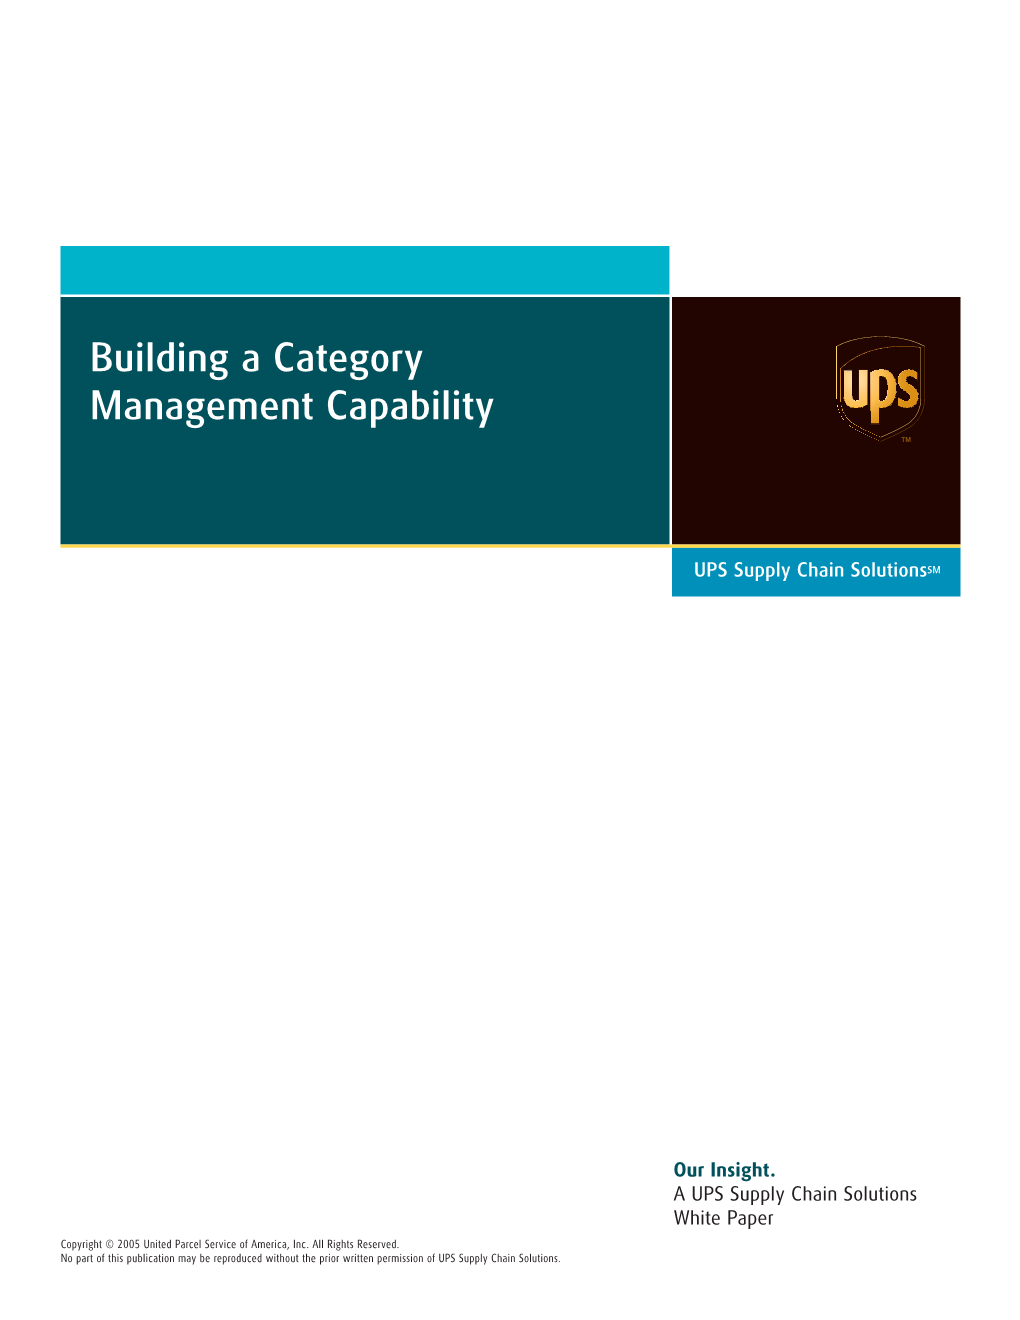 Building a Category Management Capability